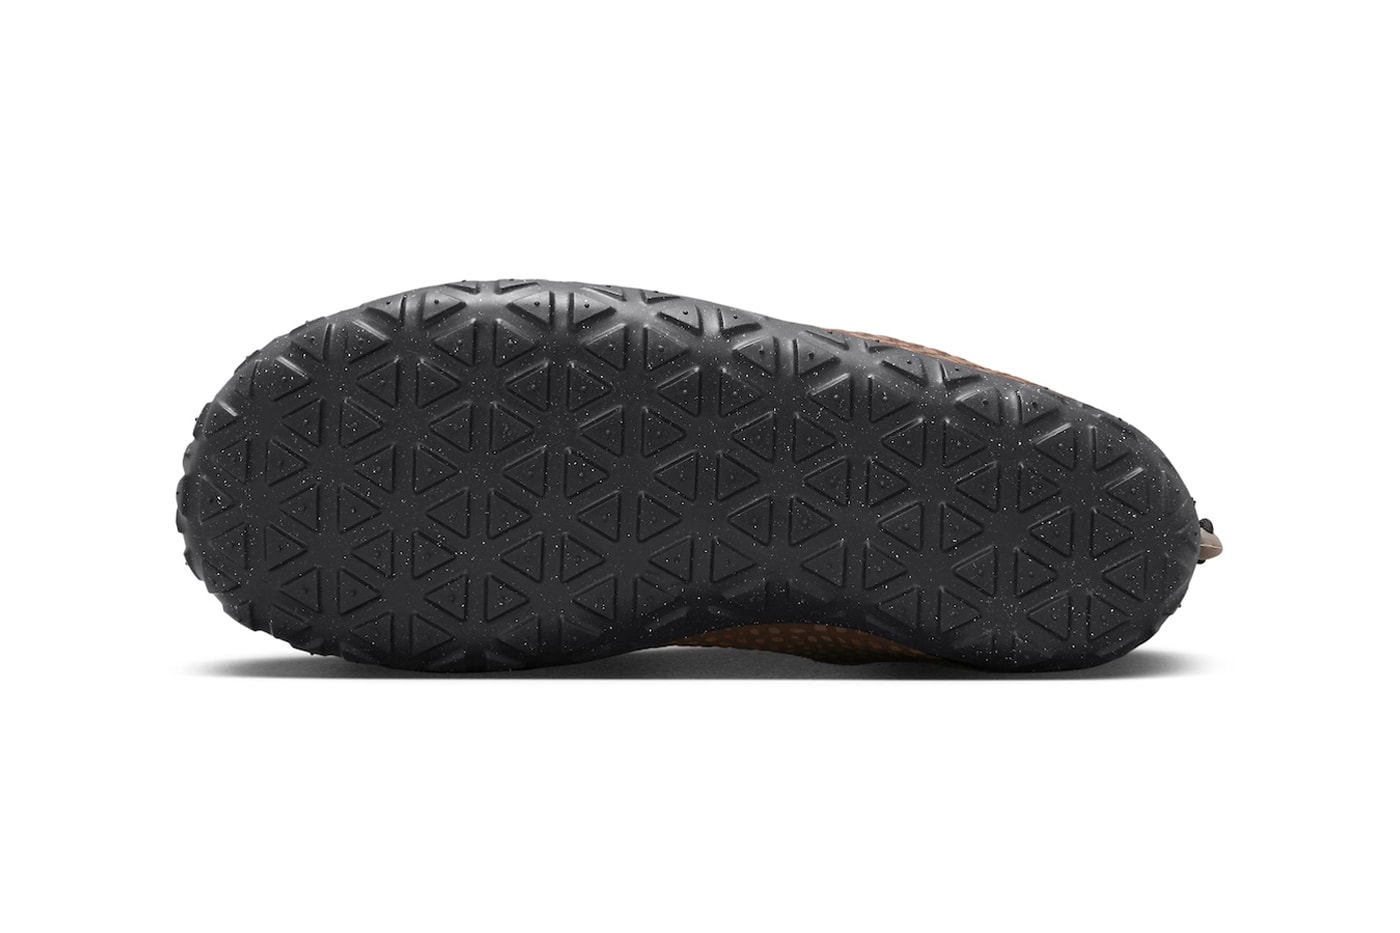 Official Look at the Nike ACG MOC Premium "Cacao Wow"  Cacao Wow/Black-Cacao Wow-Black FV4571-200 slippers clogs moccasins early january 2024 release date swoosh